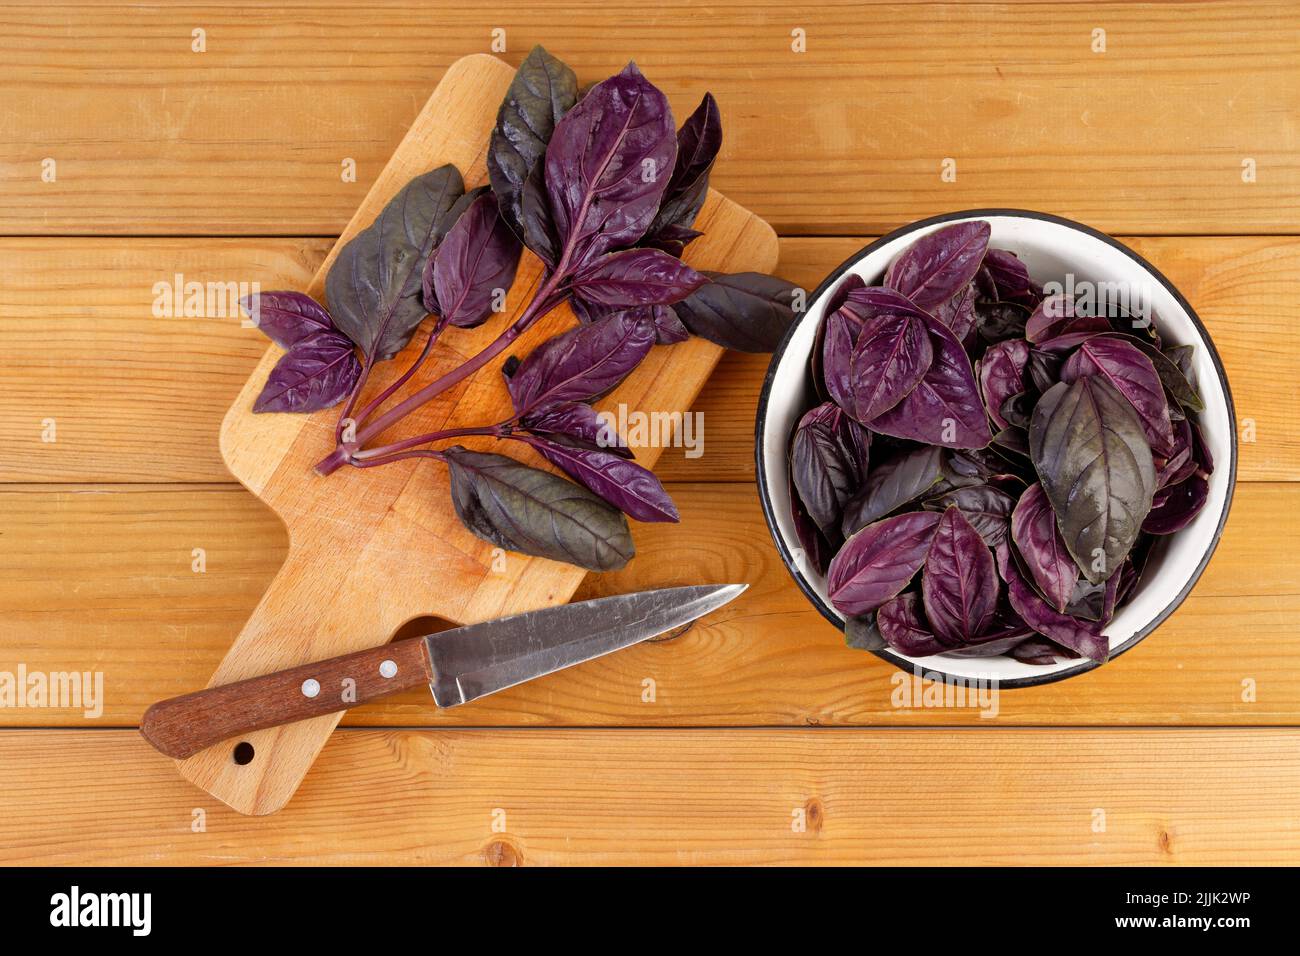 Purple basil leaves on the cutting board and in a bowl on a wooden kitchen table. Top view. Stock Photo